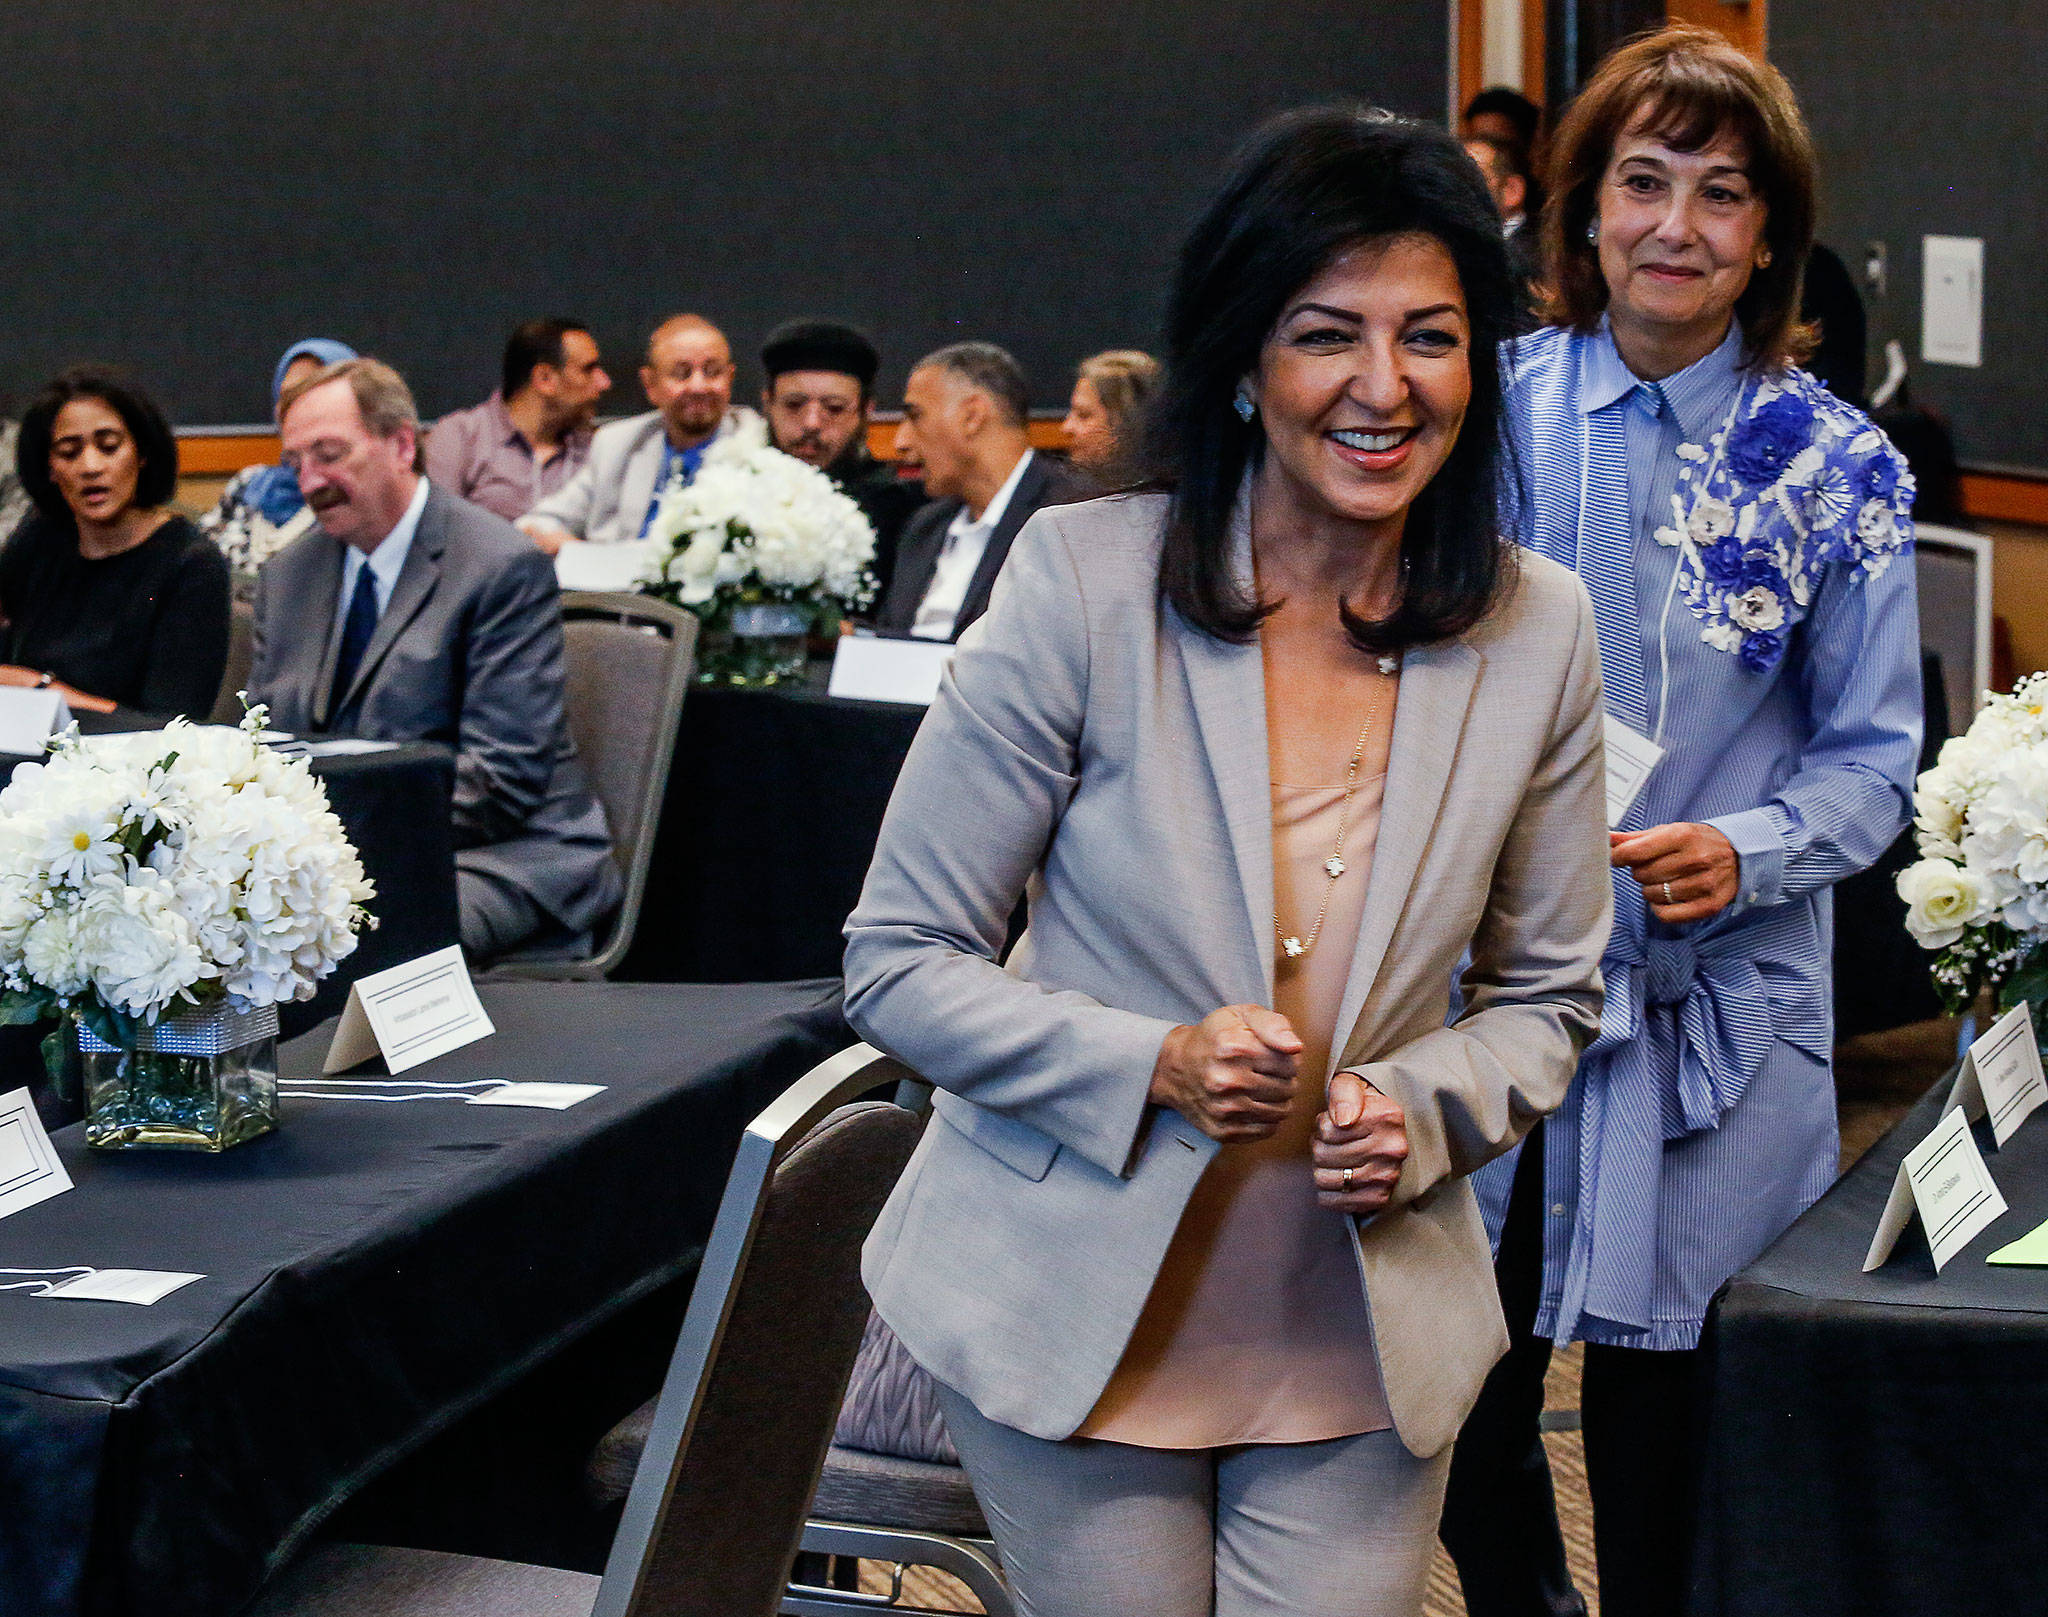 After greeting Dave Somers and his assistant, Alessandra Durham (back left) Egyptian ambassador Lamia Mekhemar, followed by Dr. Amira El-Bastawissi, spots another person of interest on the way back to her seat at the Lynnwood Convention Center Friday. (Dan Bates / The Herald)